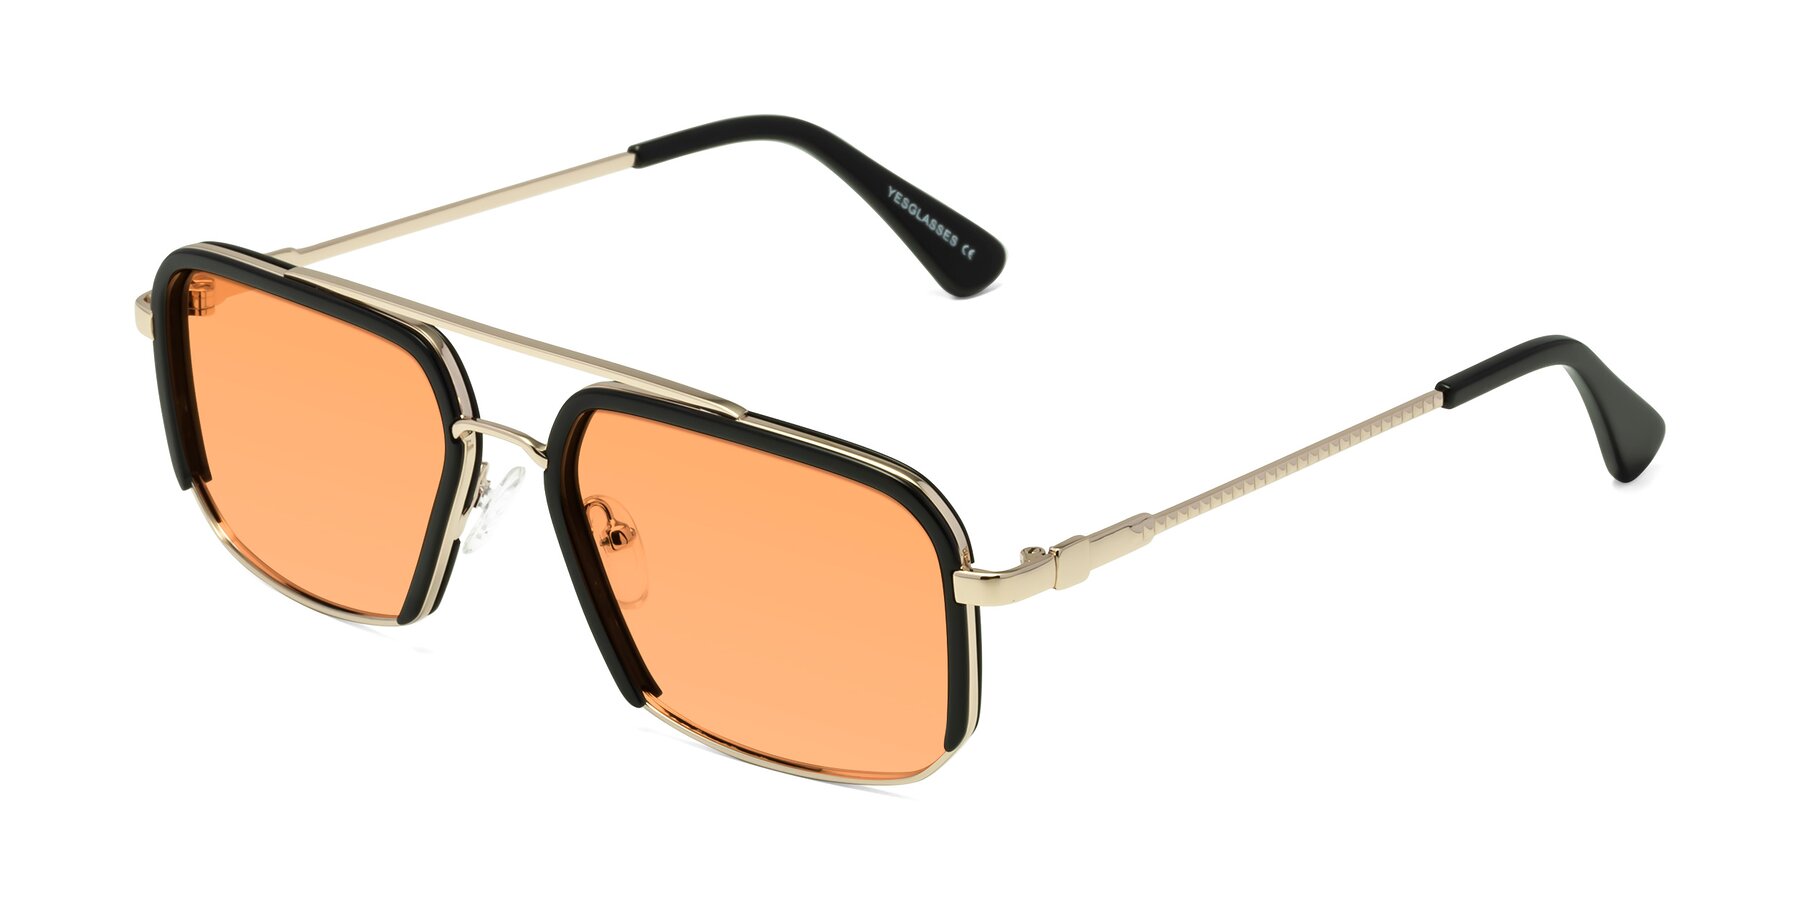 Angle of Dechter in Black-Gold with Medium Orange Tinted Lenses